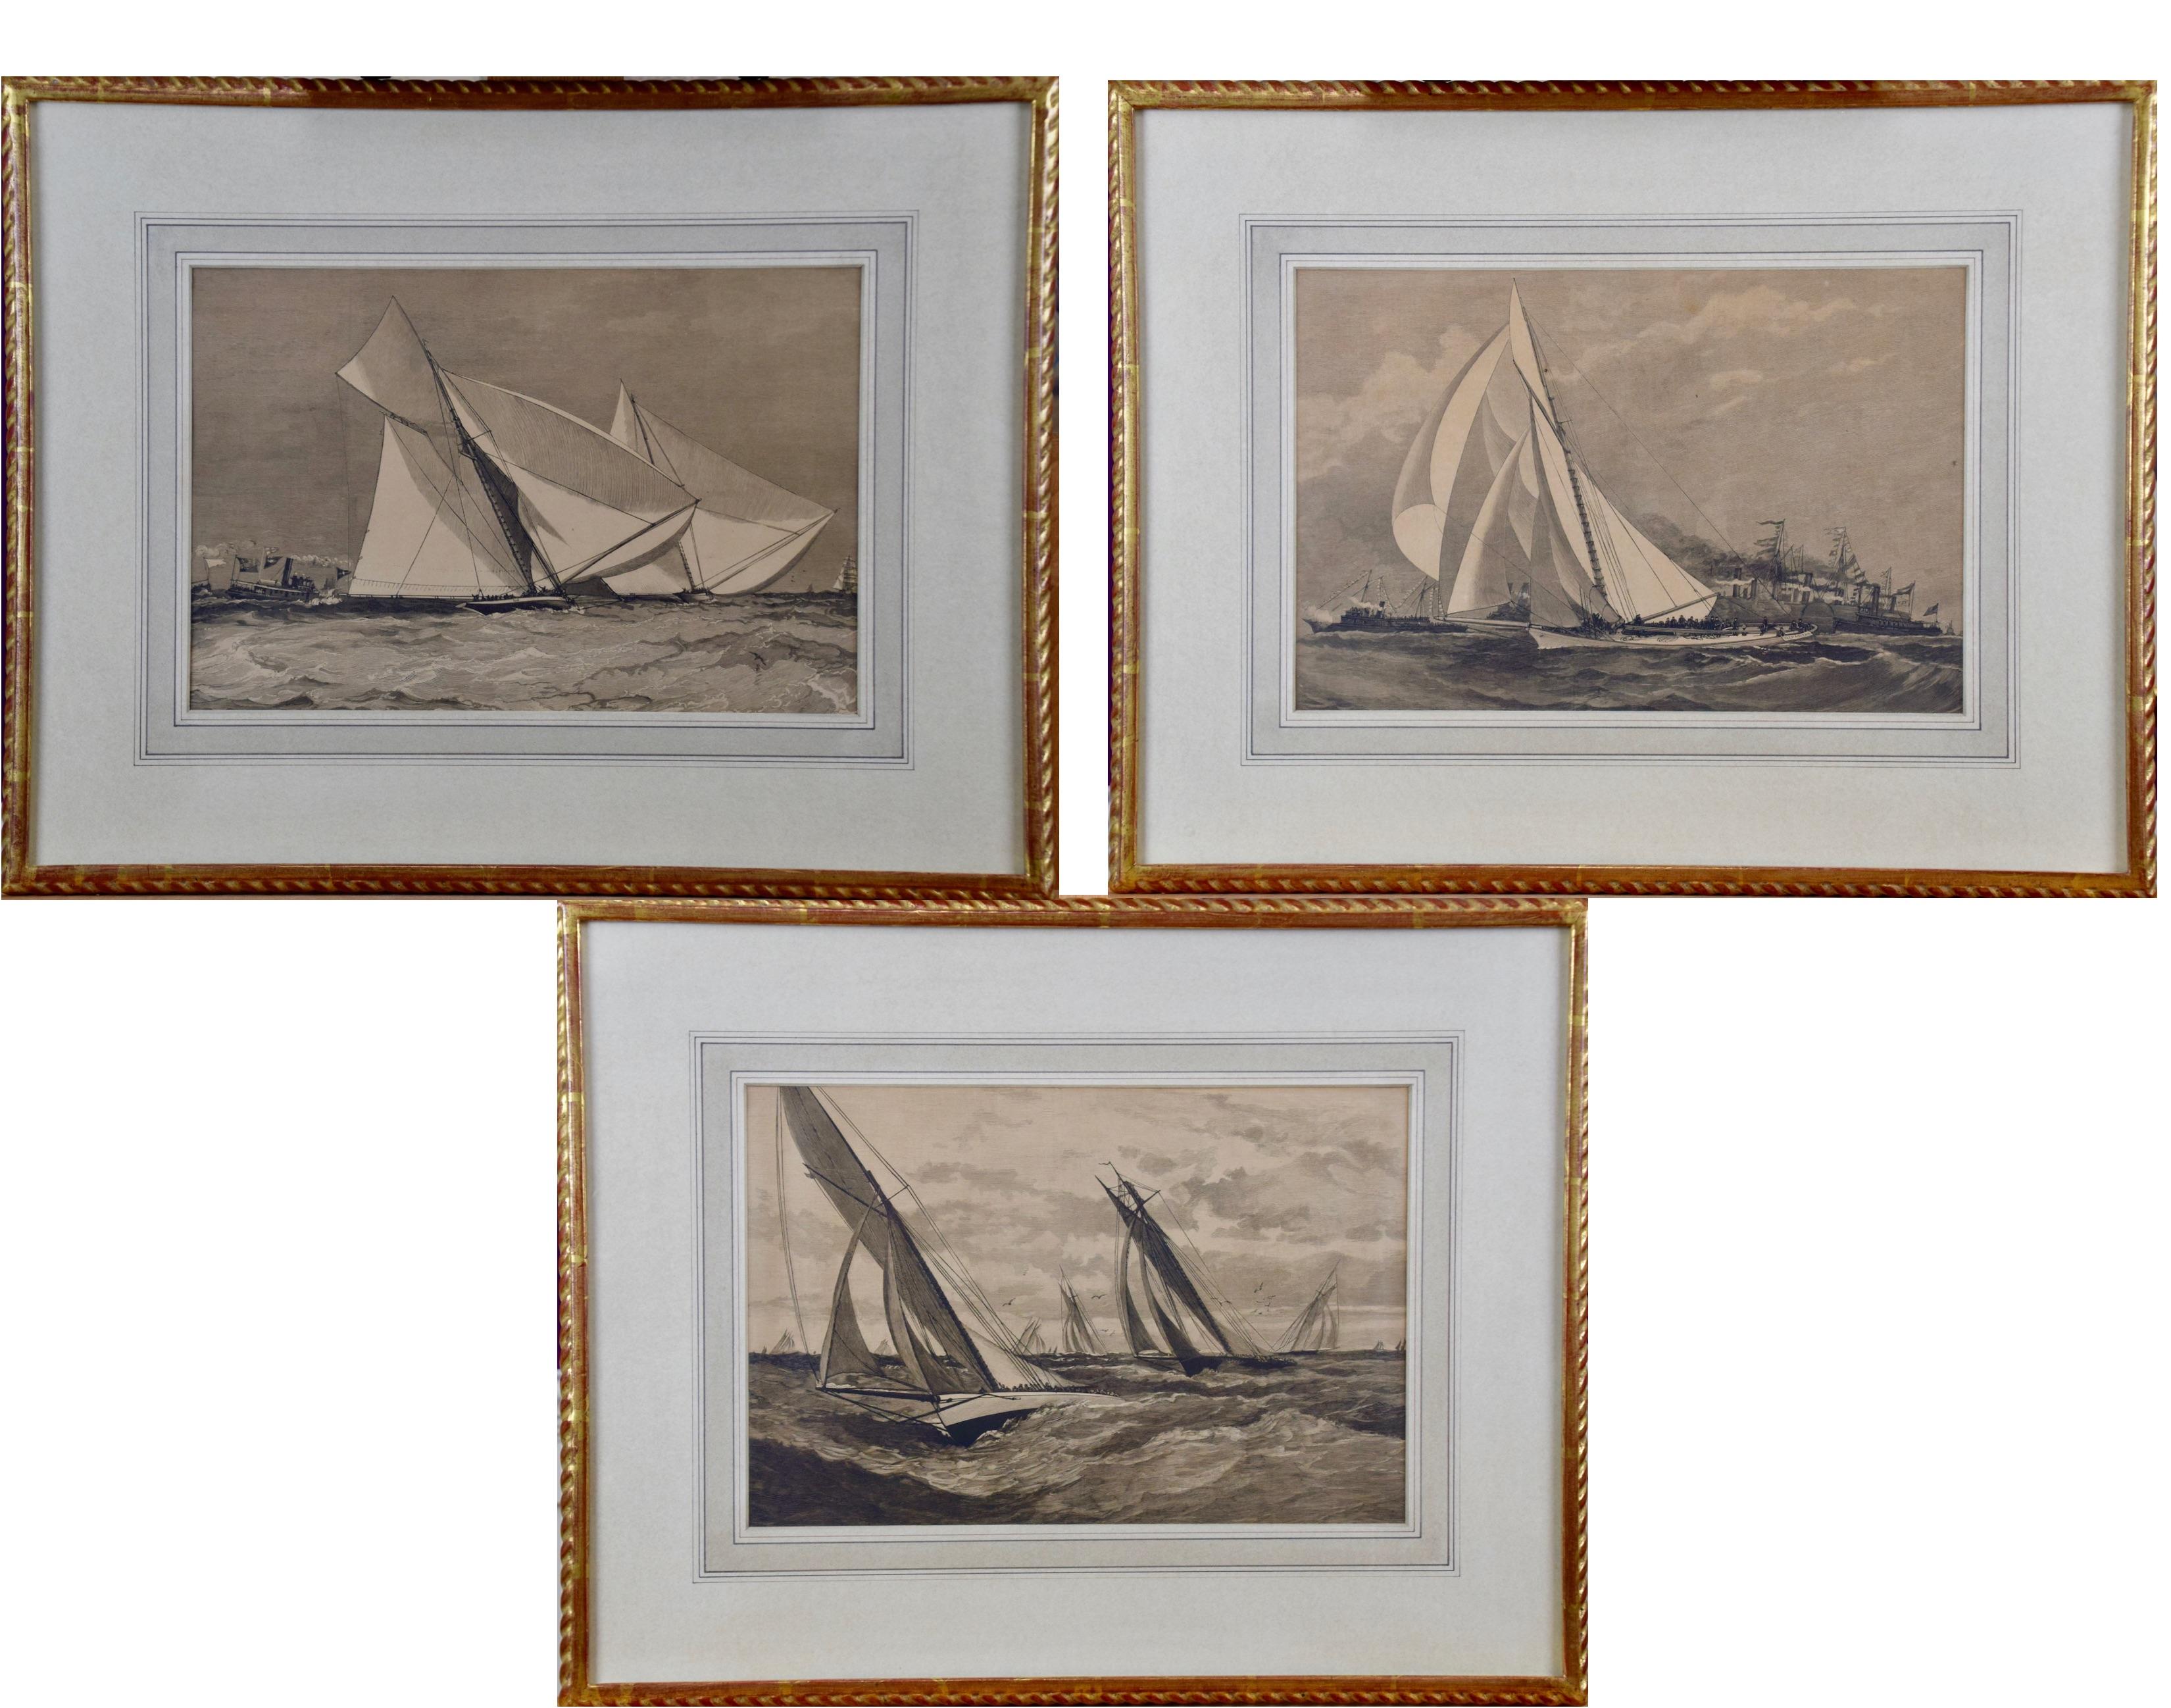 Unknown Print - Three Engravings Depicting Sailing Yachts Competing in 1885 America's Cup Trials